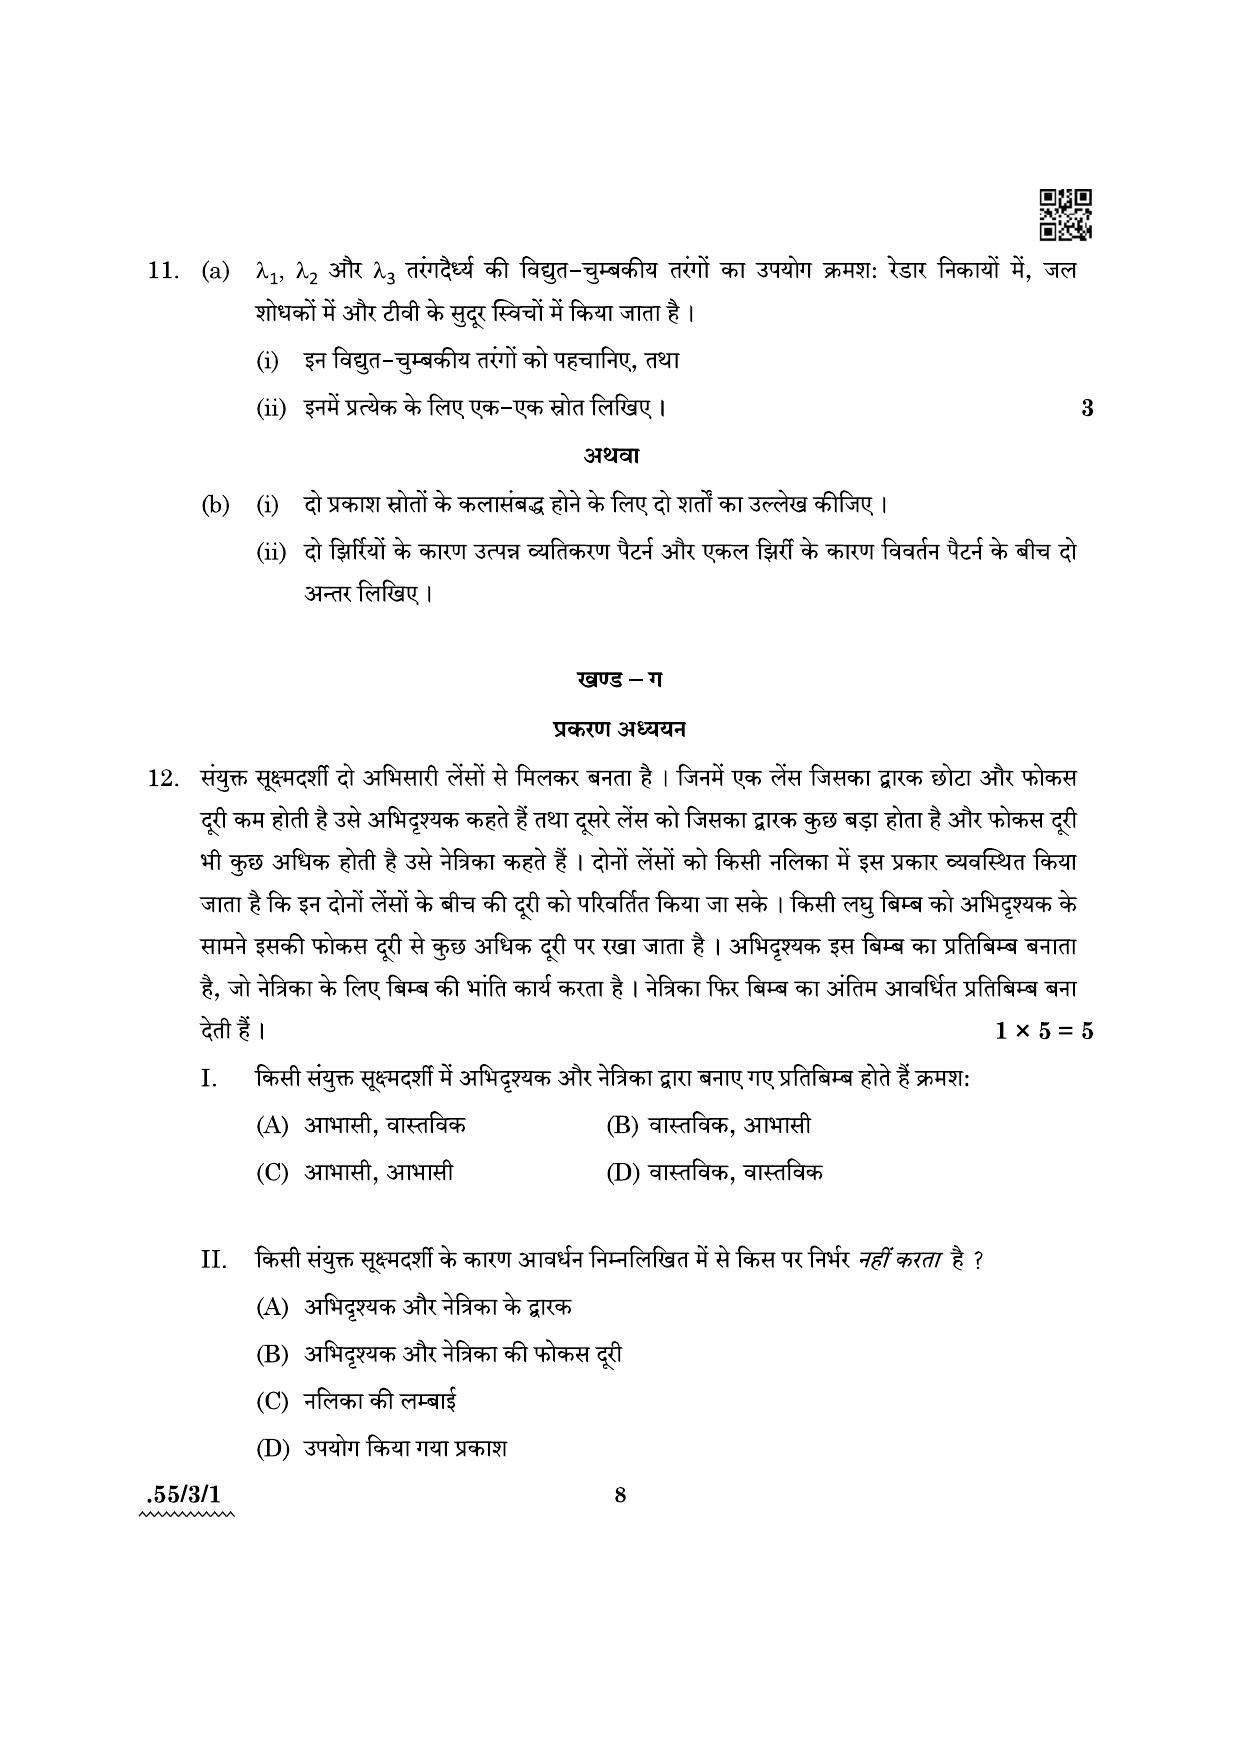 CBSE Class 12 55-3-1 Physics 2022 Question Paper - Page 8